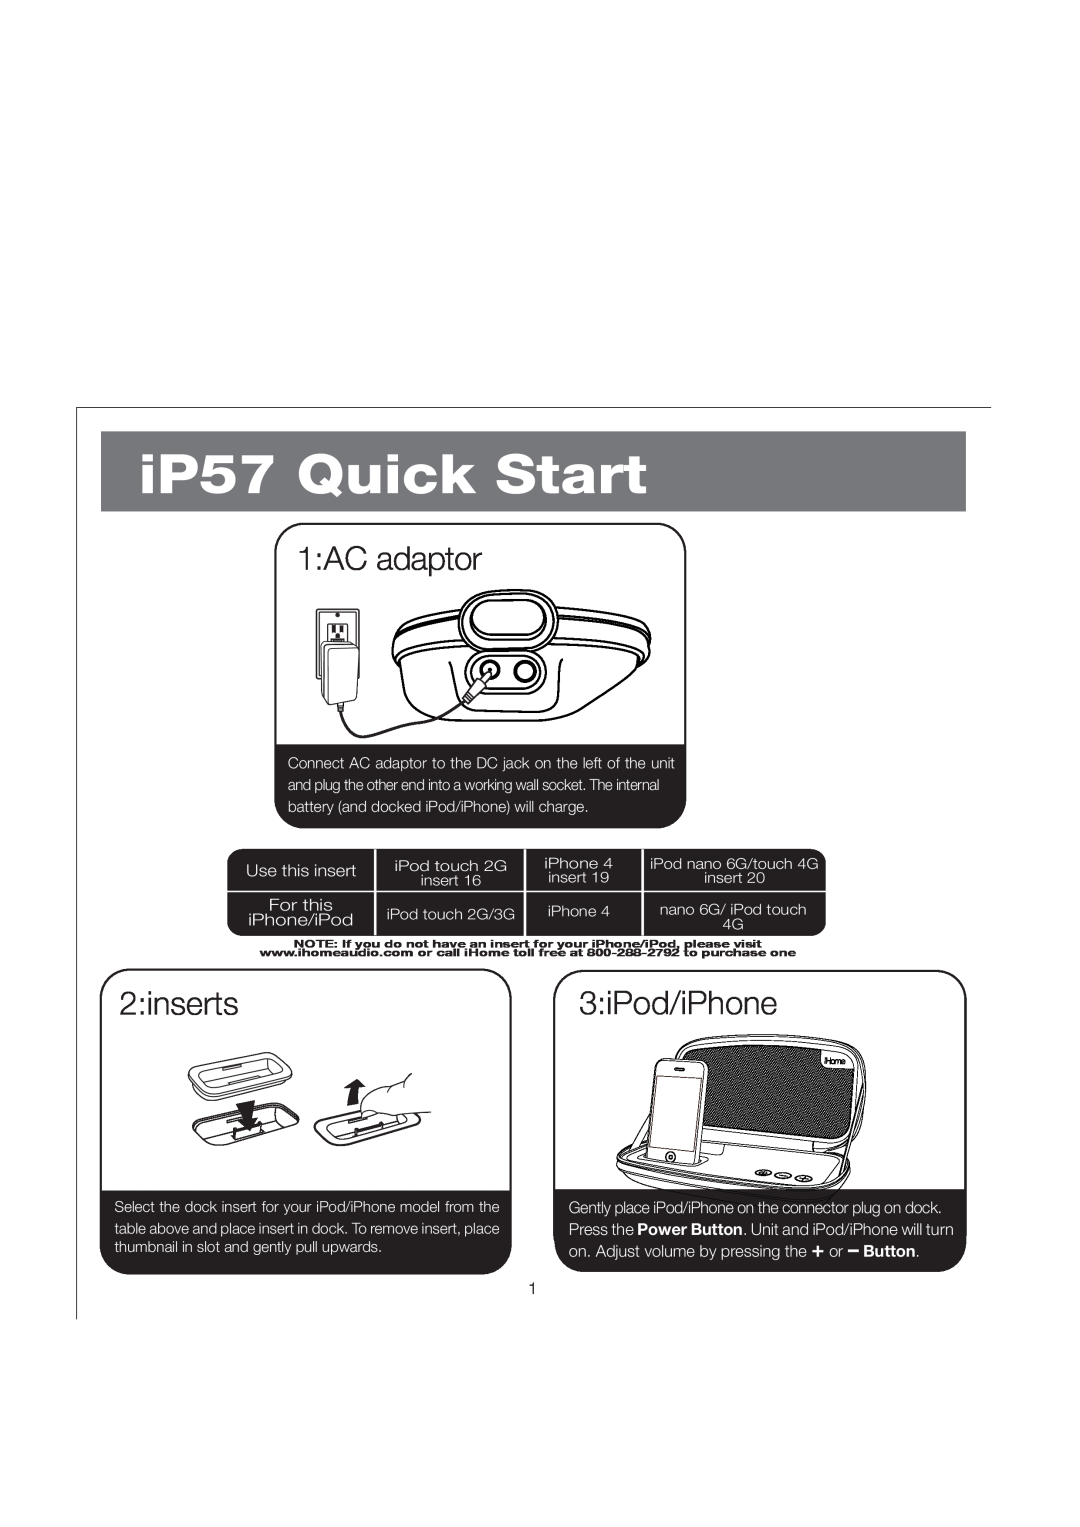 iHome IP57 manual iP57 Quick Start, AC adaptor, inserts3 iPod/iPhone, Use this insert, For this, iPhone/iPod 